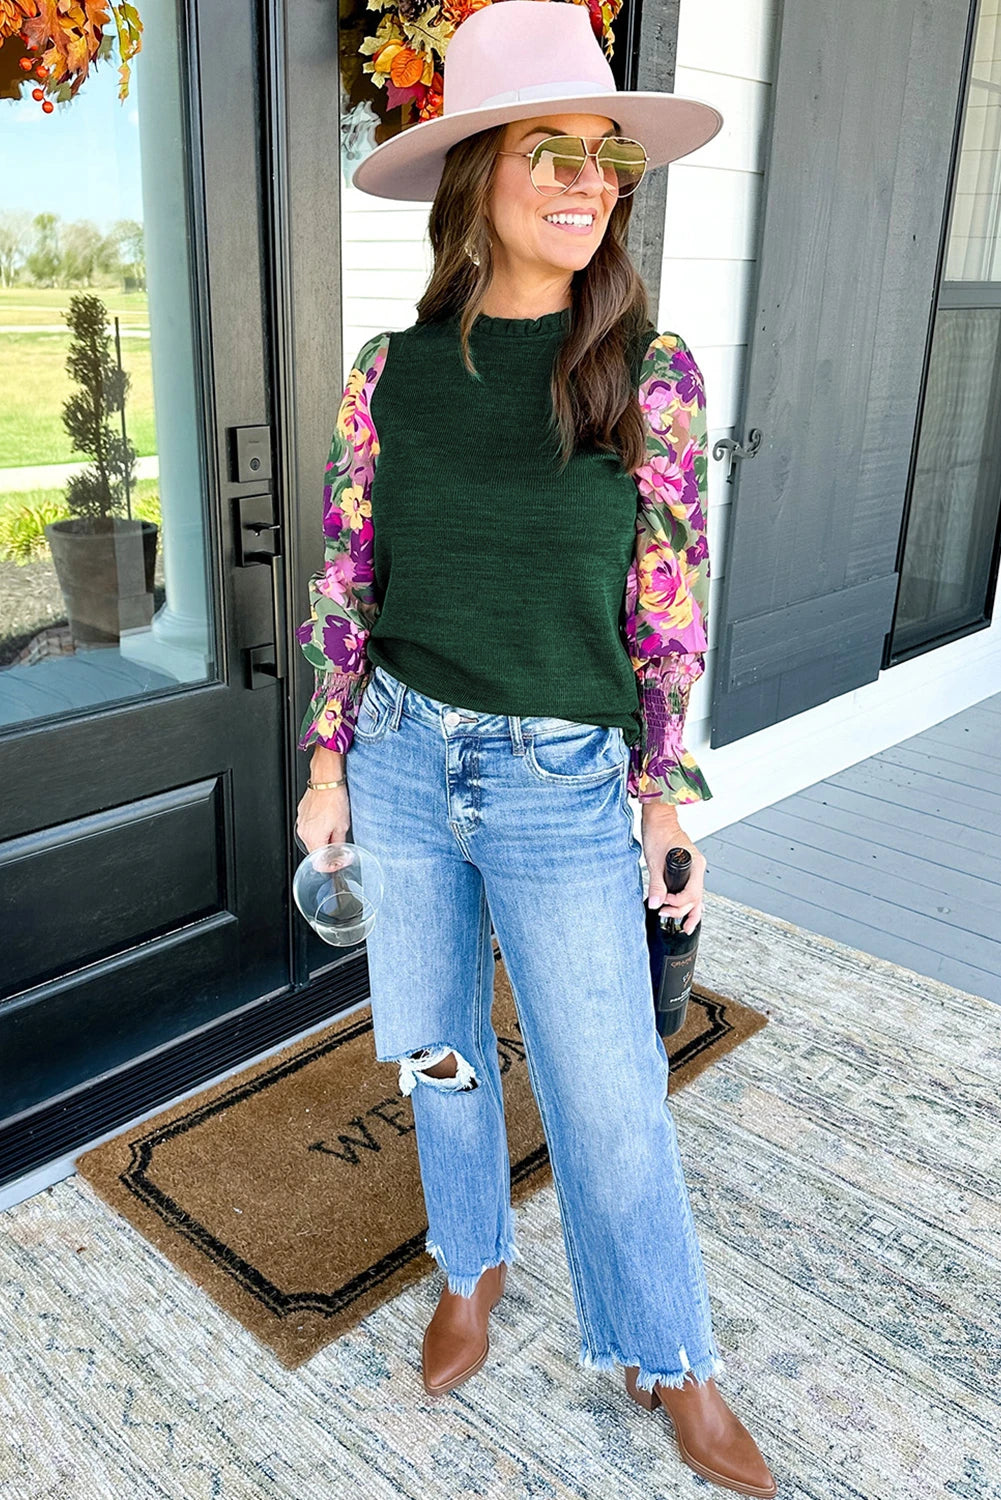 GREEN SWEATER WITH CONTRASTING FLORAL SLEEVES